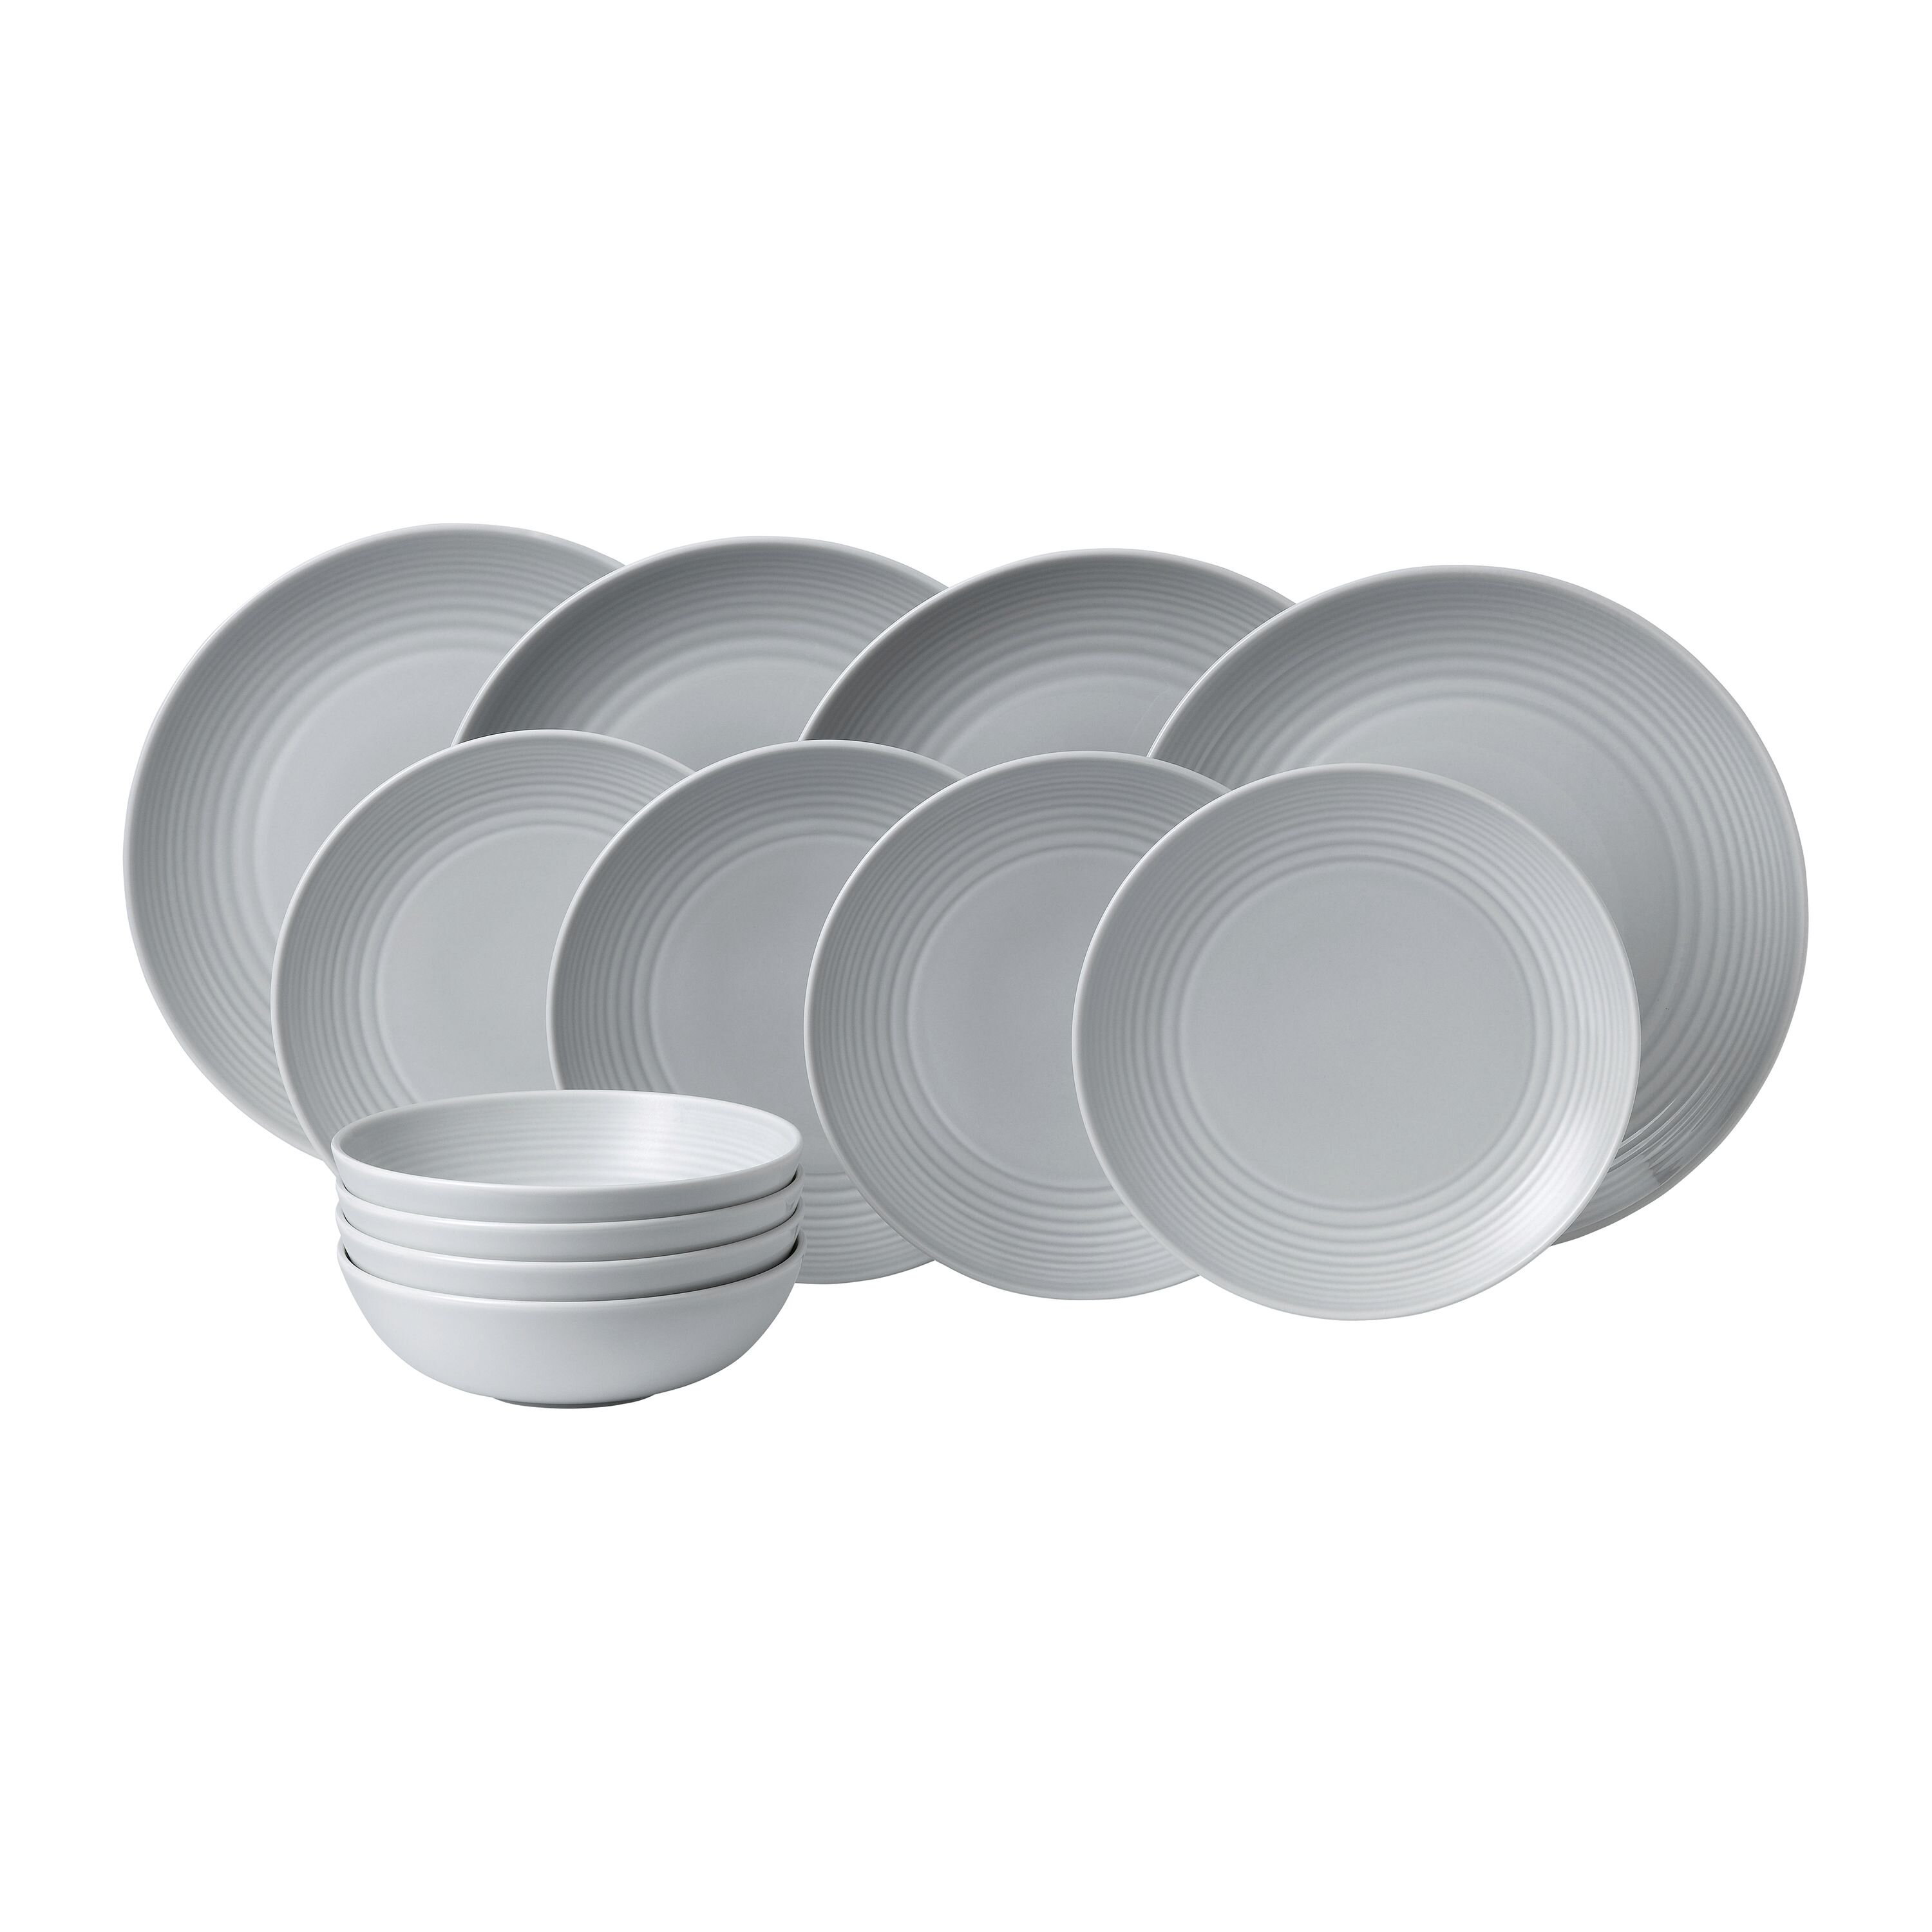 Gordon Ramsay by Royal Doulton 8-Piece Stainless Steel Cookware